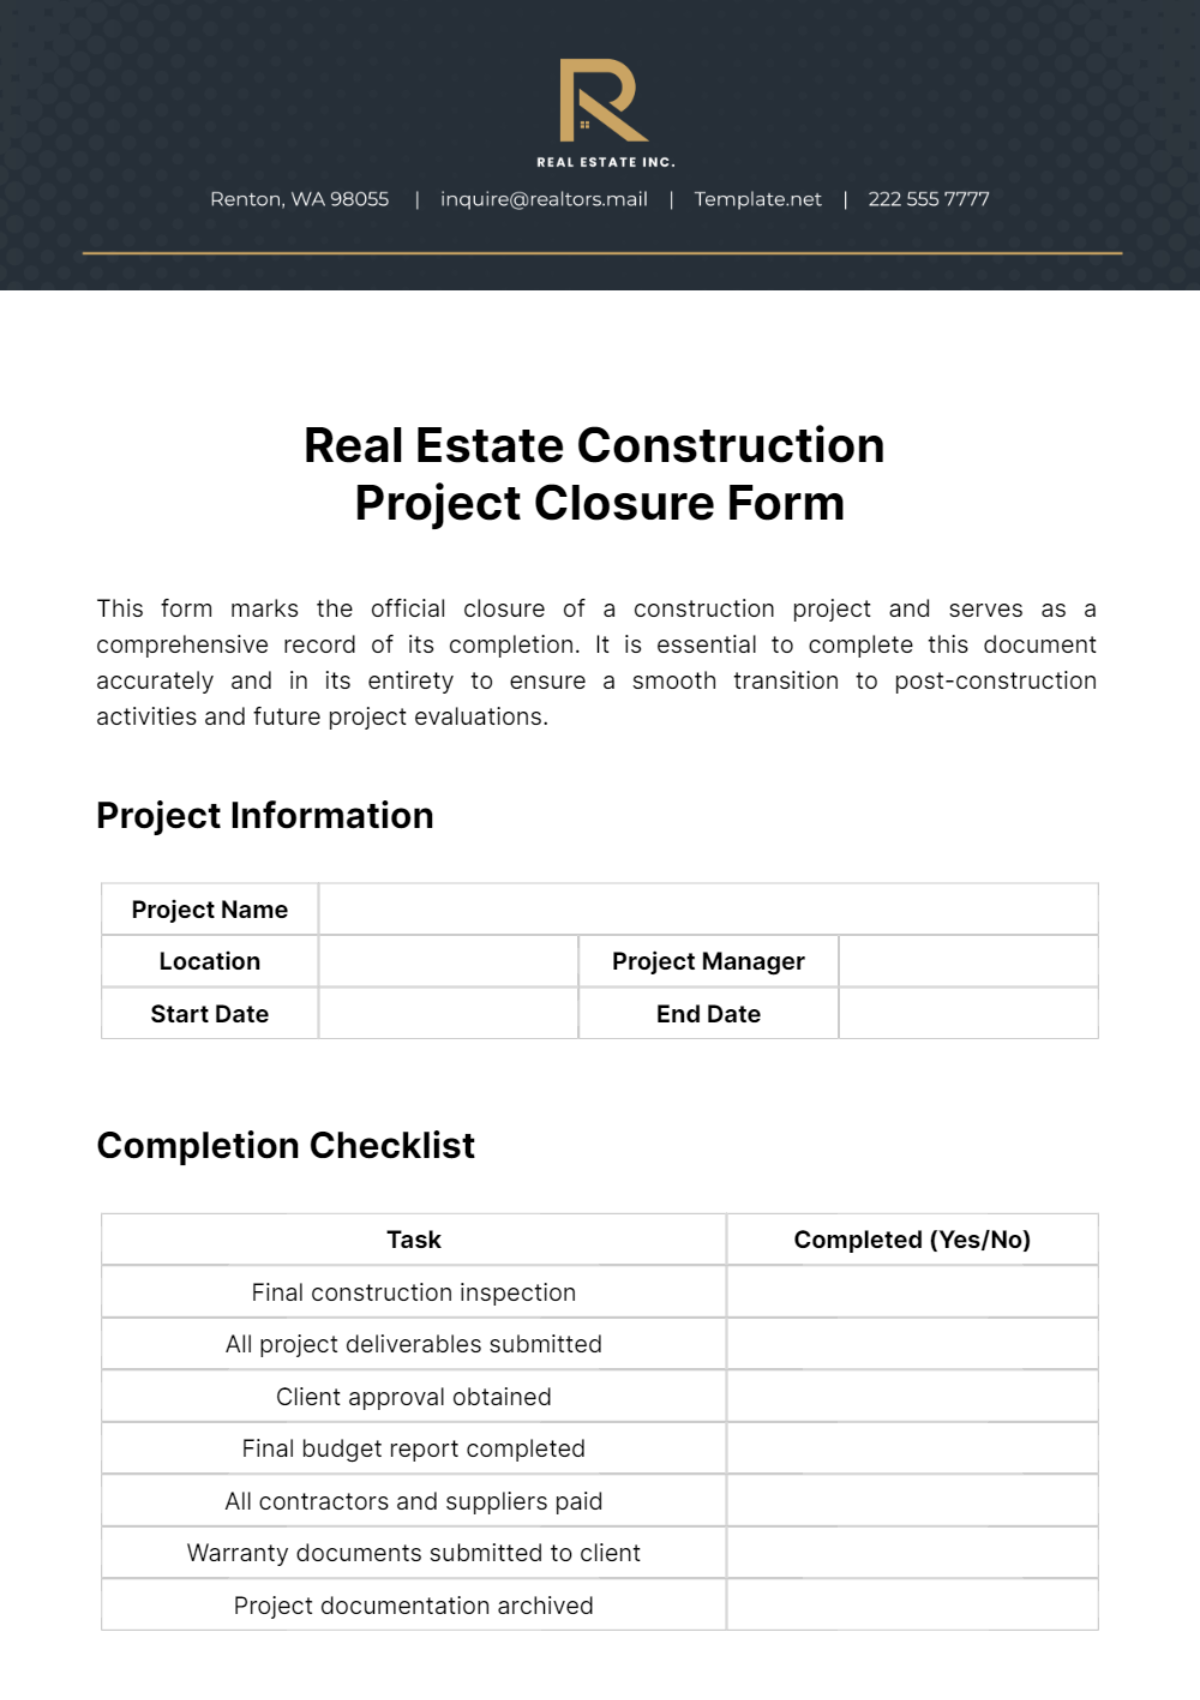 Real Estate Construction Project Closure Form Template